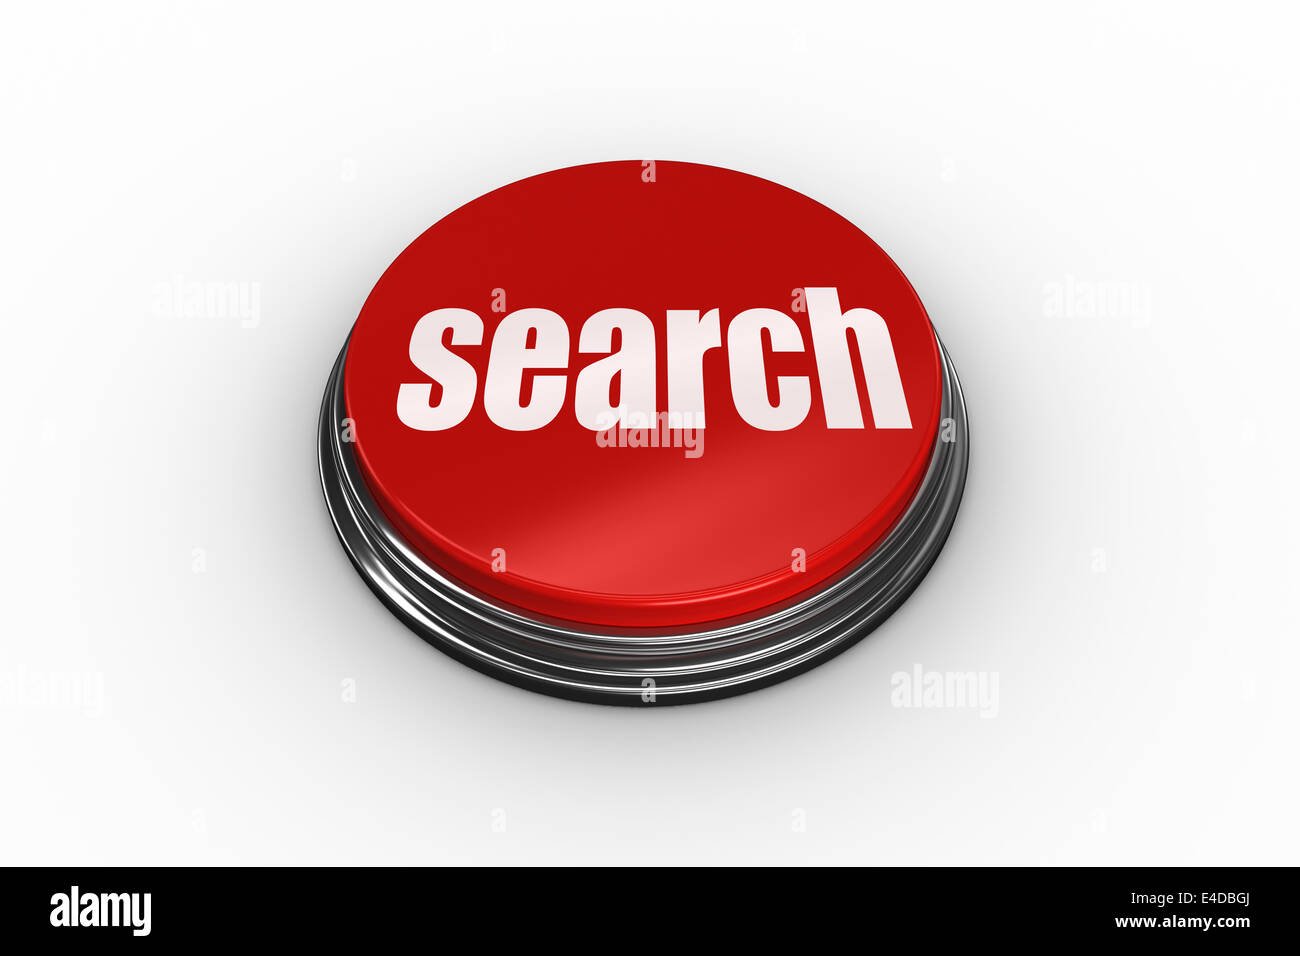 Search on digitally generated red push button Stock Photo